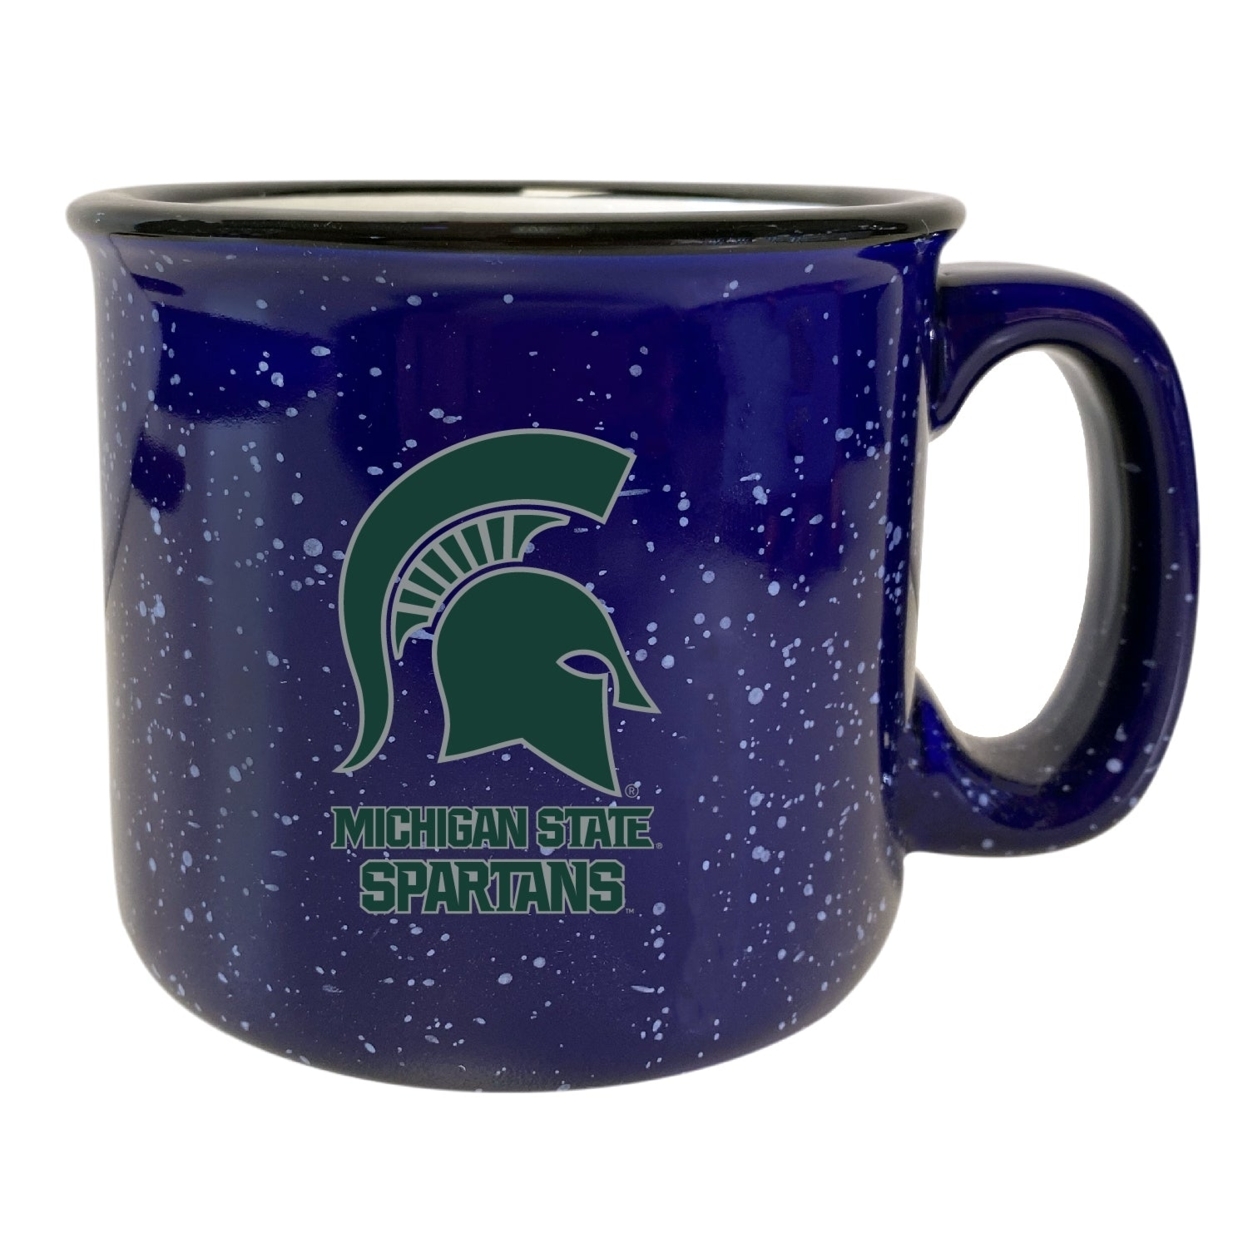 Michigan State Spartans Speckled Ceramic Camper Coffee Mug - Choose Your Color - Navy